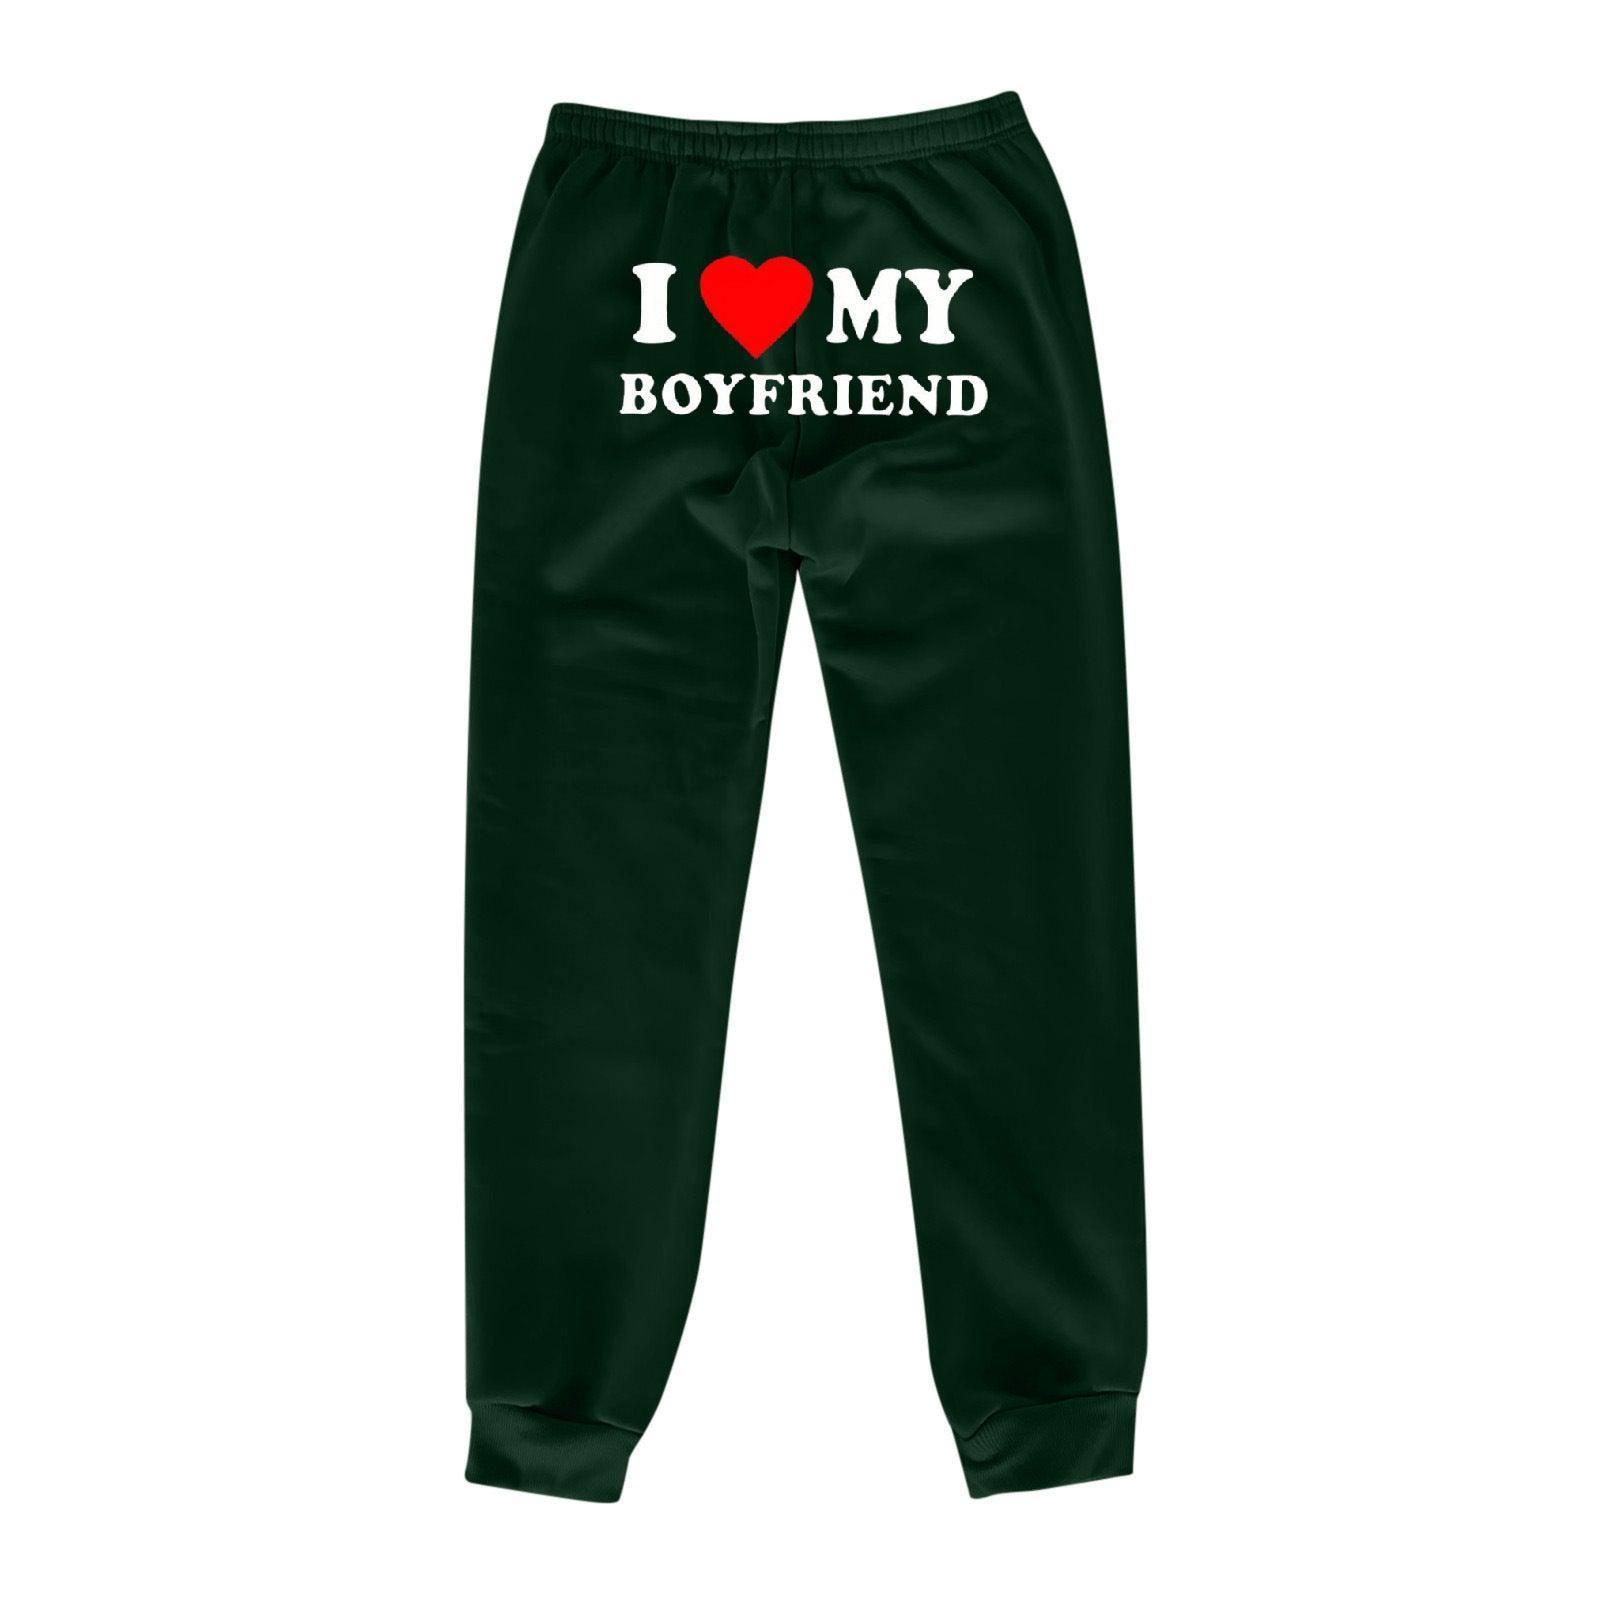 I Love MY BOYFRIEND Printed Trousers Casual Sweatpants Men-Green Back Picture-10